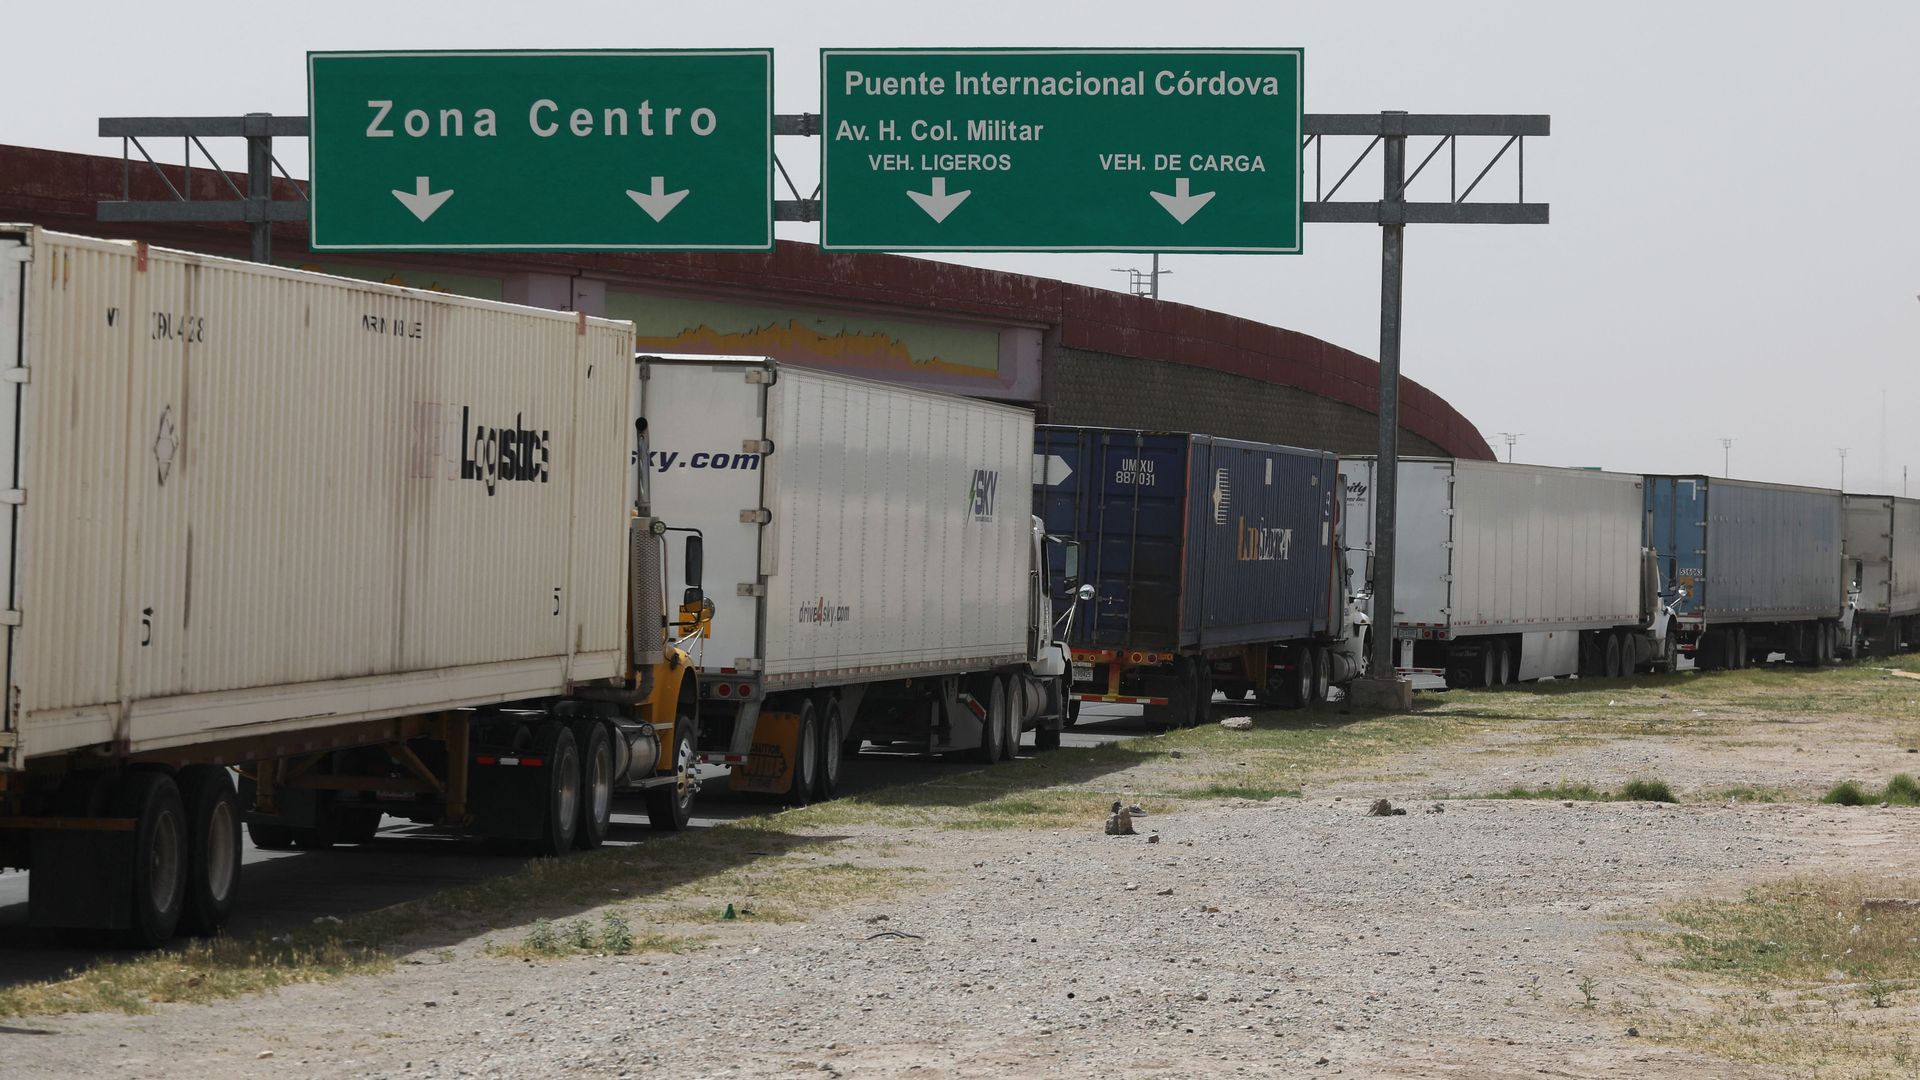 Large commercial semi-trucks are lined up in Mexico waiting to cross into the U.S. 